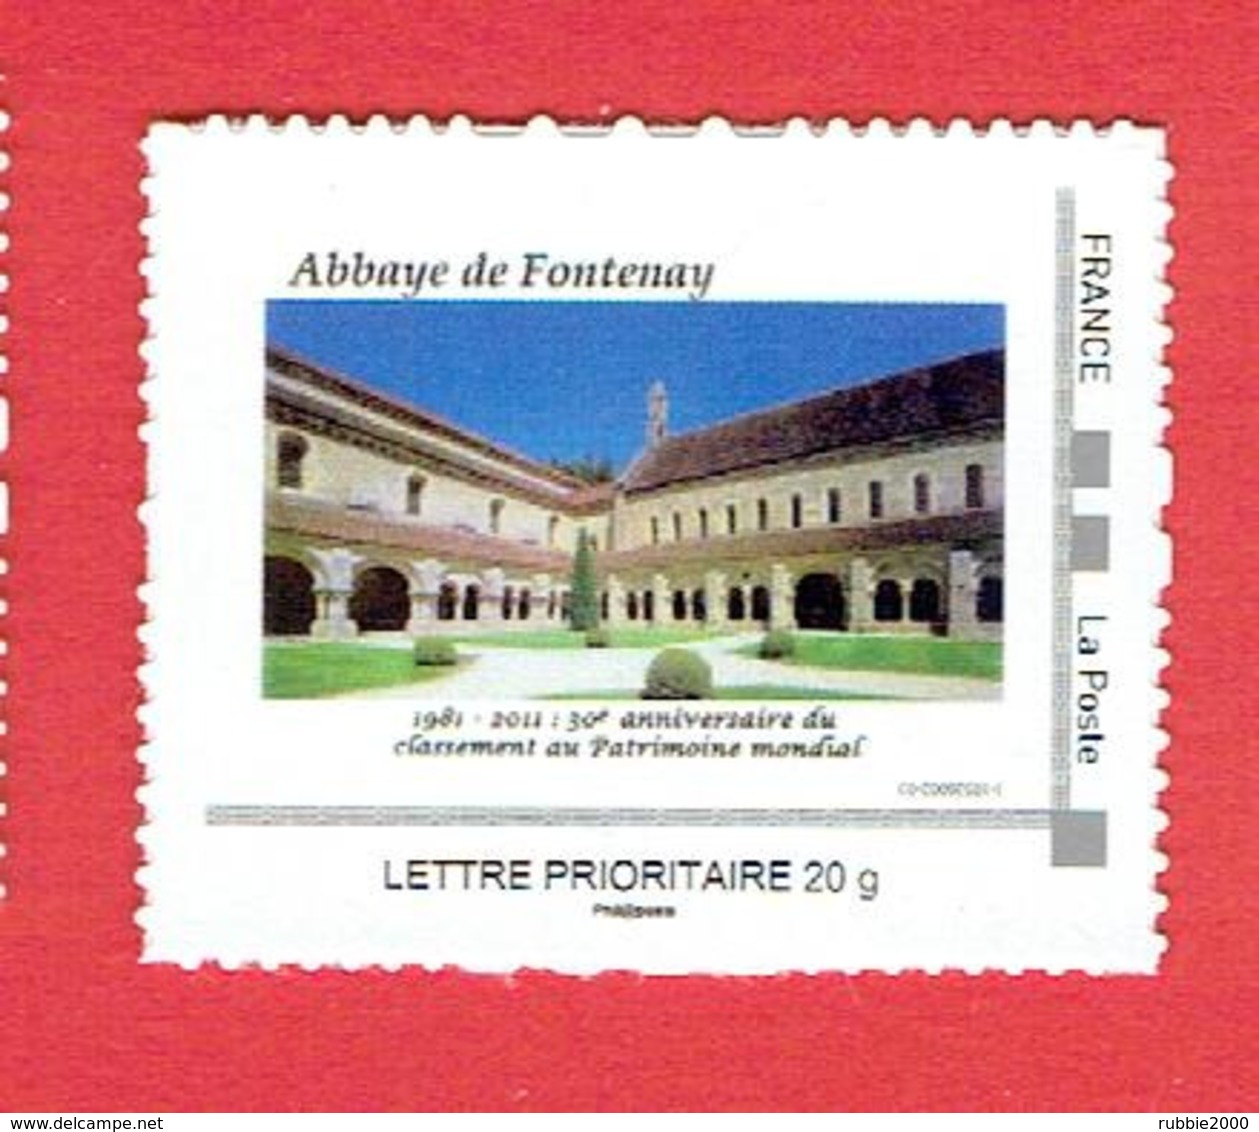 FRANCE TIMBRE NEUF ABBAYE DE FONTENAY 2011 MONTBARD COTE D OR LETTRE PRIORITAIRE - Neufs